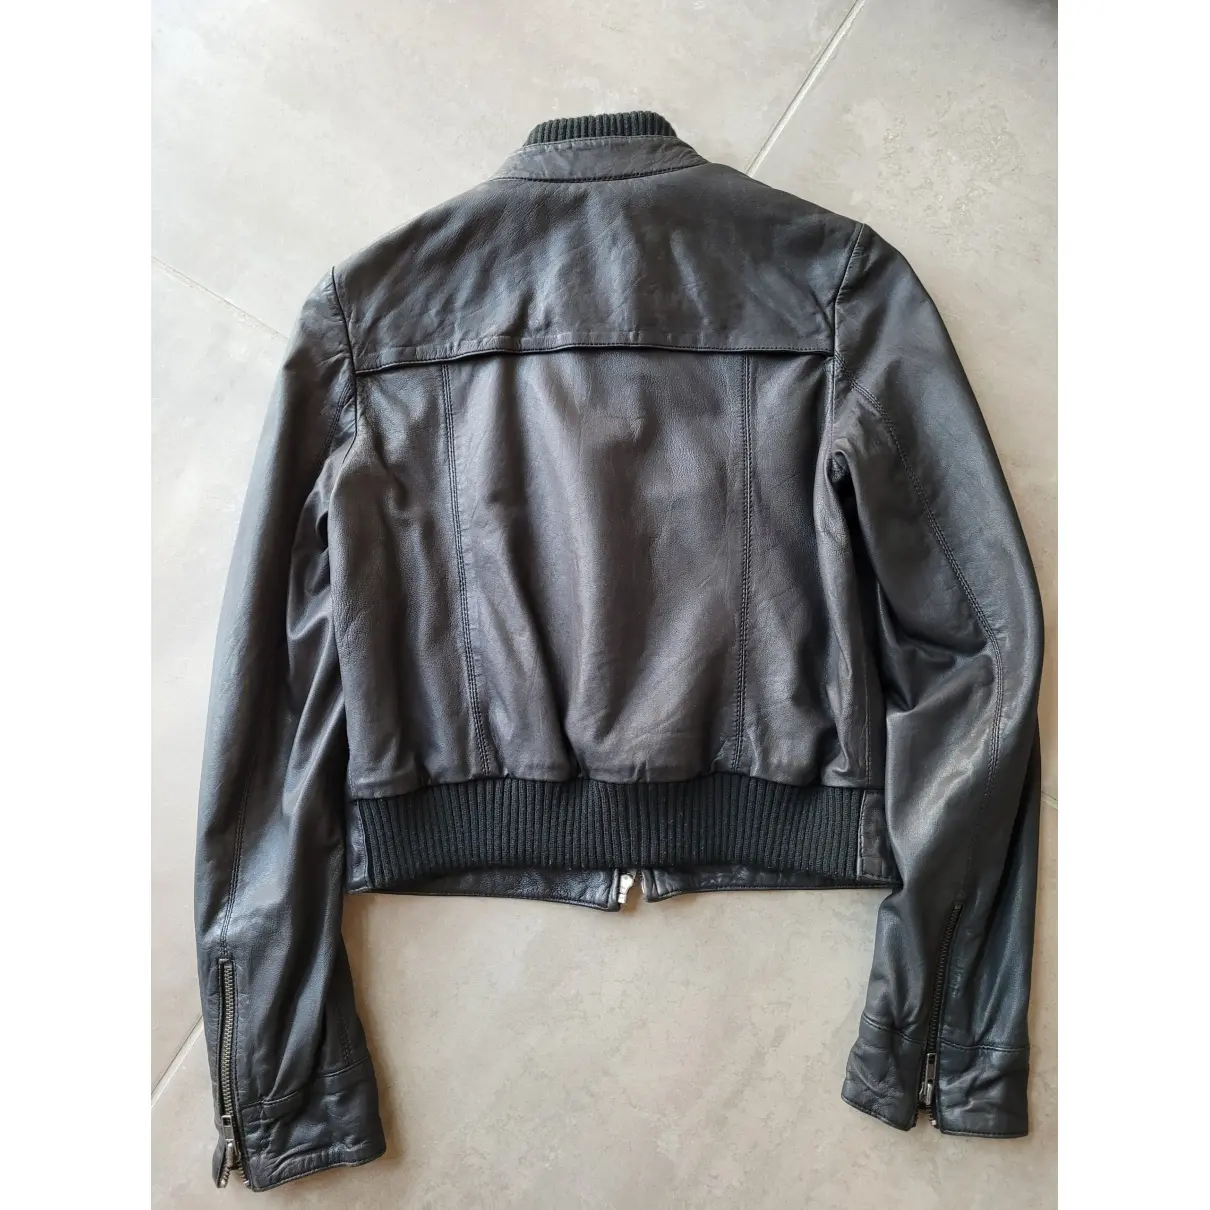 Buy Max & Co Leather jacket online